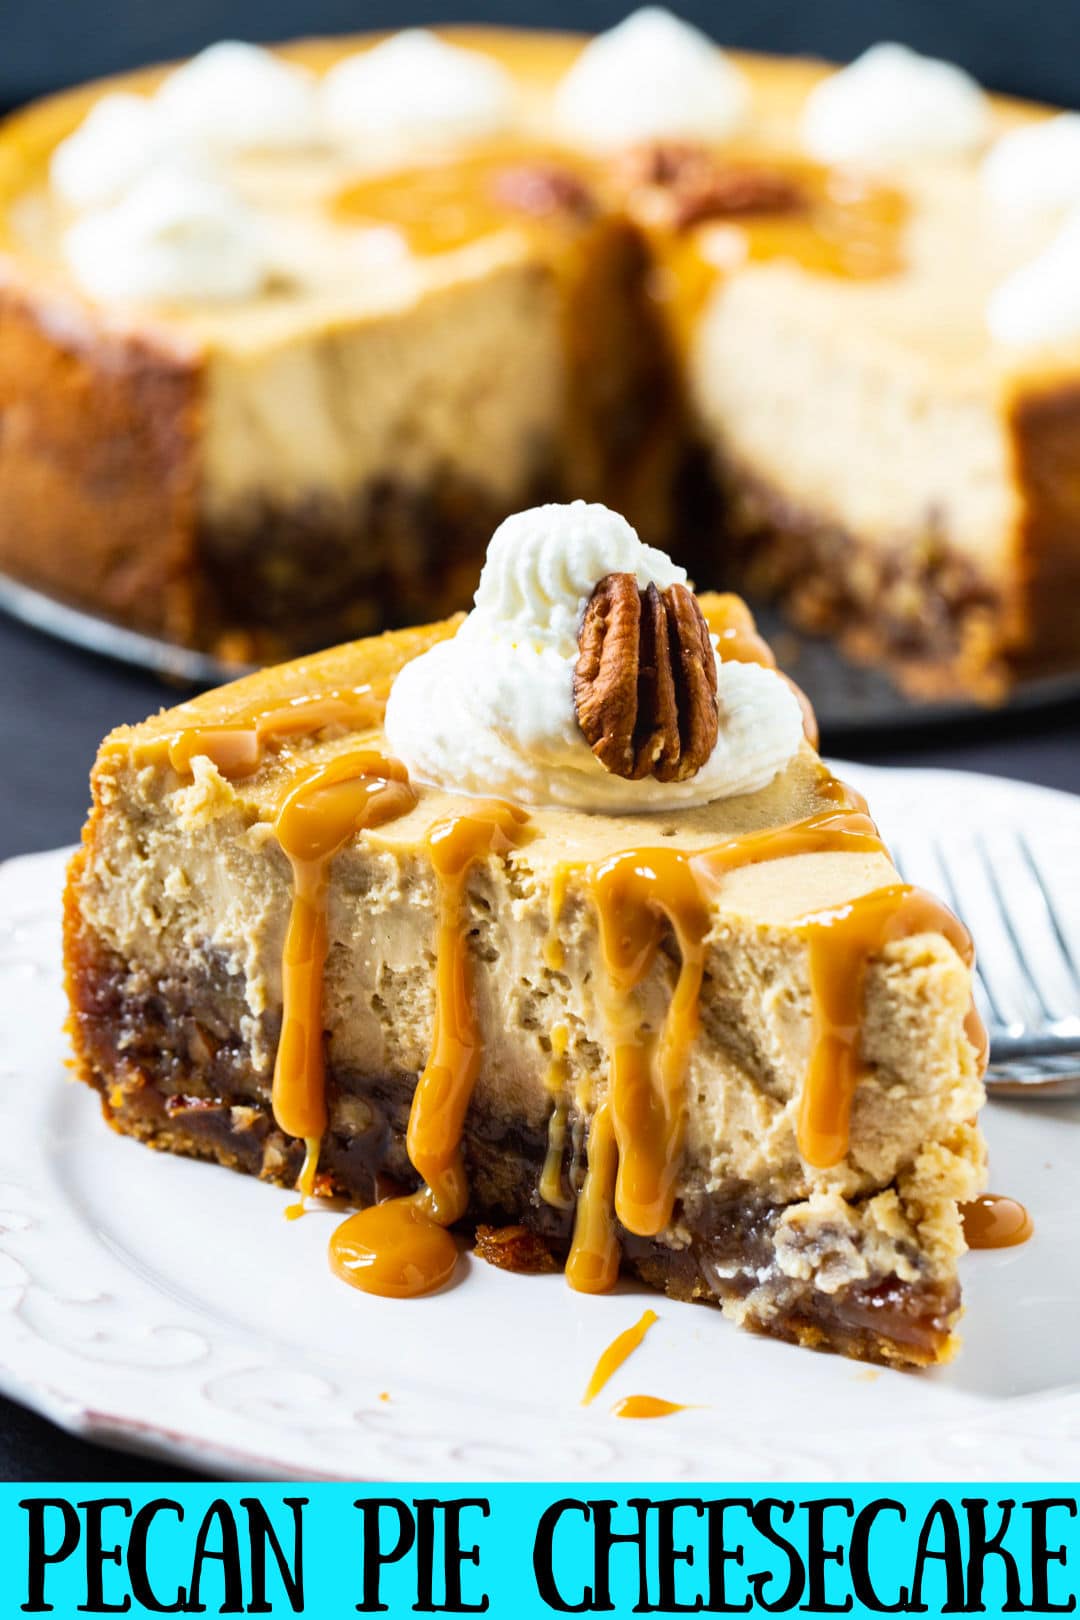 Pecan Pie Cheesecake slice on a plate.